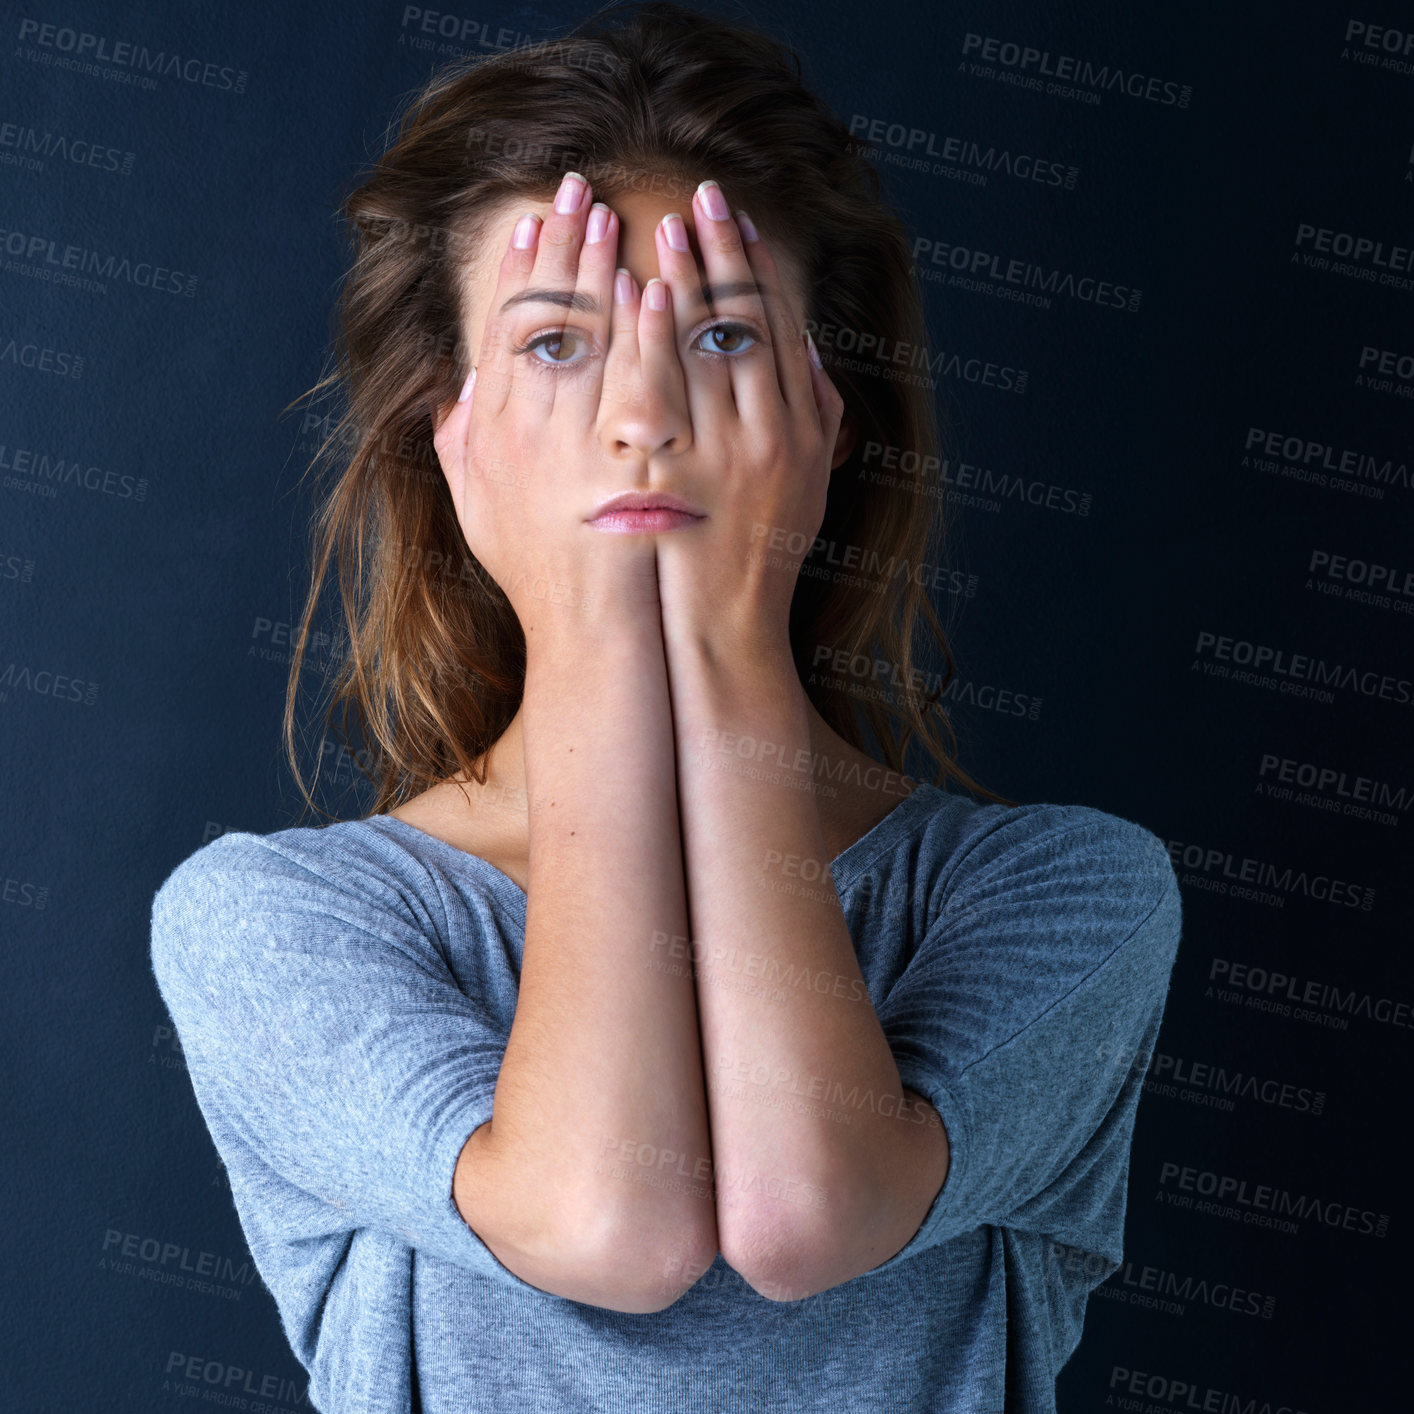 Buy stock photo Studio shot of a teenage girl with her face superimposed on hands covering her eyes against a dark background